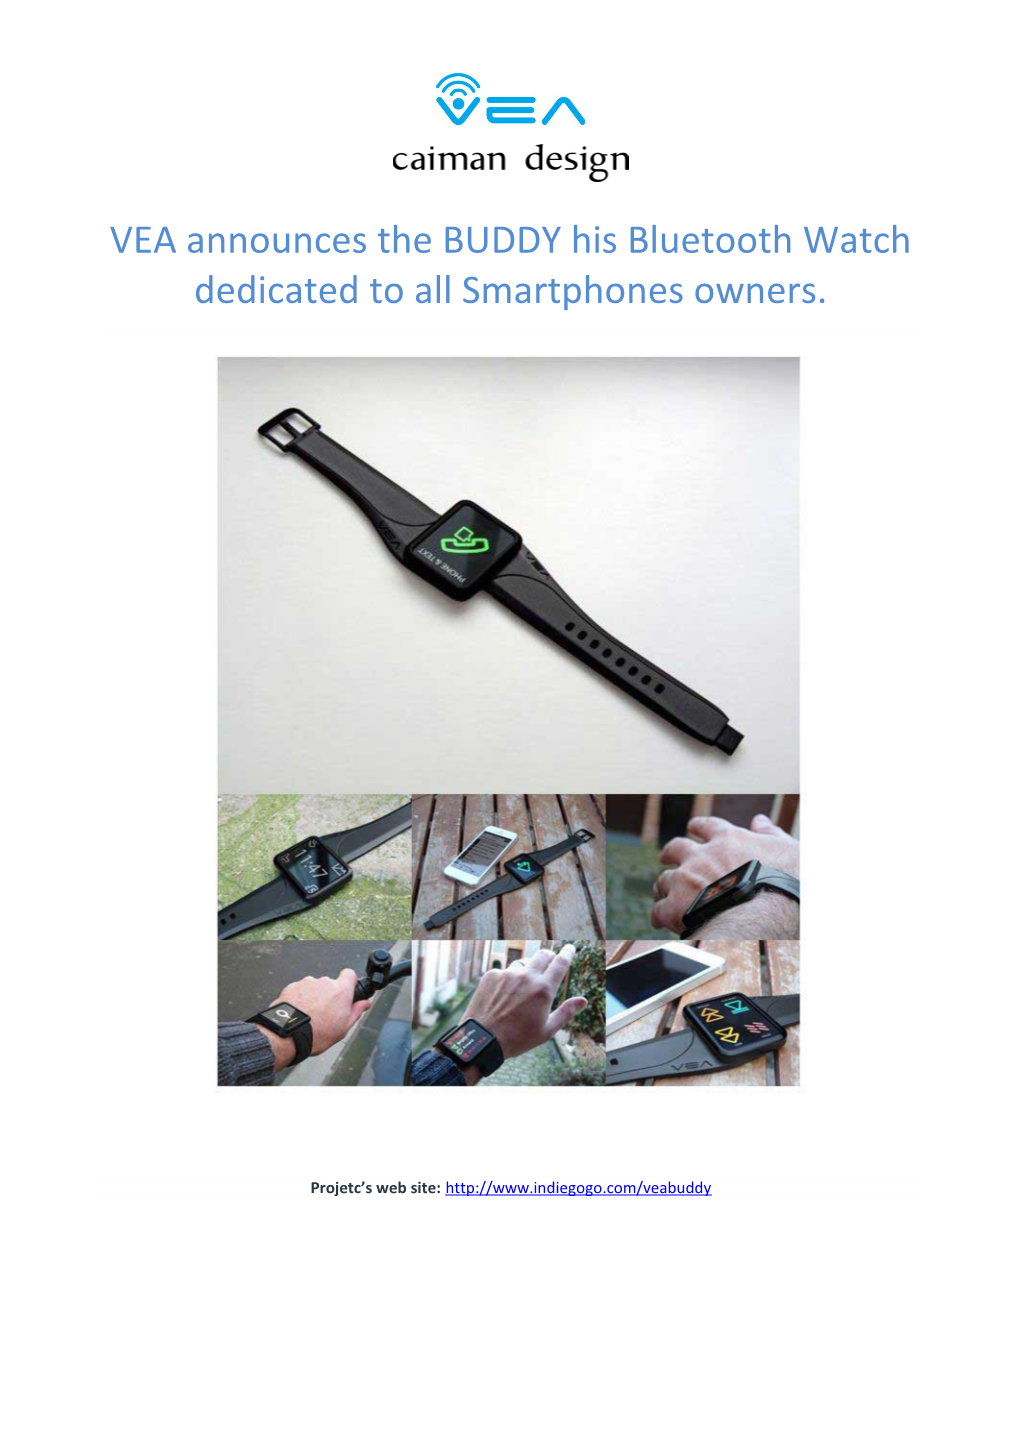 VEA Announces the BUDDY His Bluetooth Watch Dedicated to All Smartphones Owners